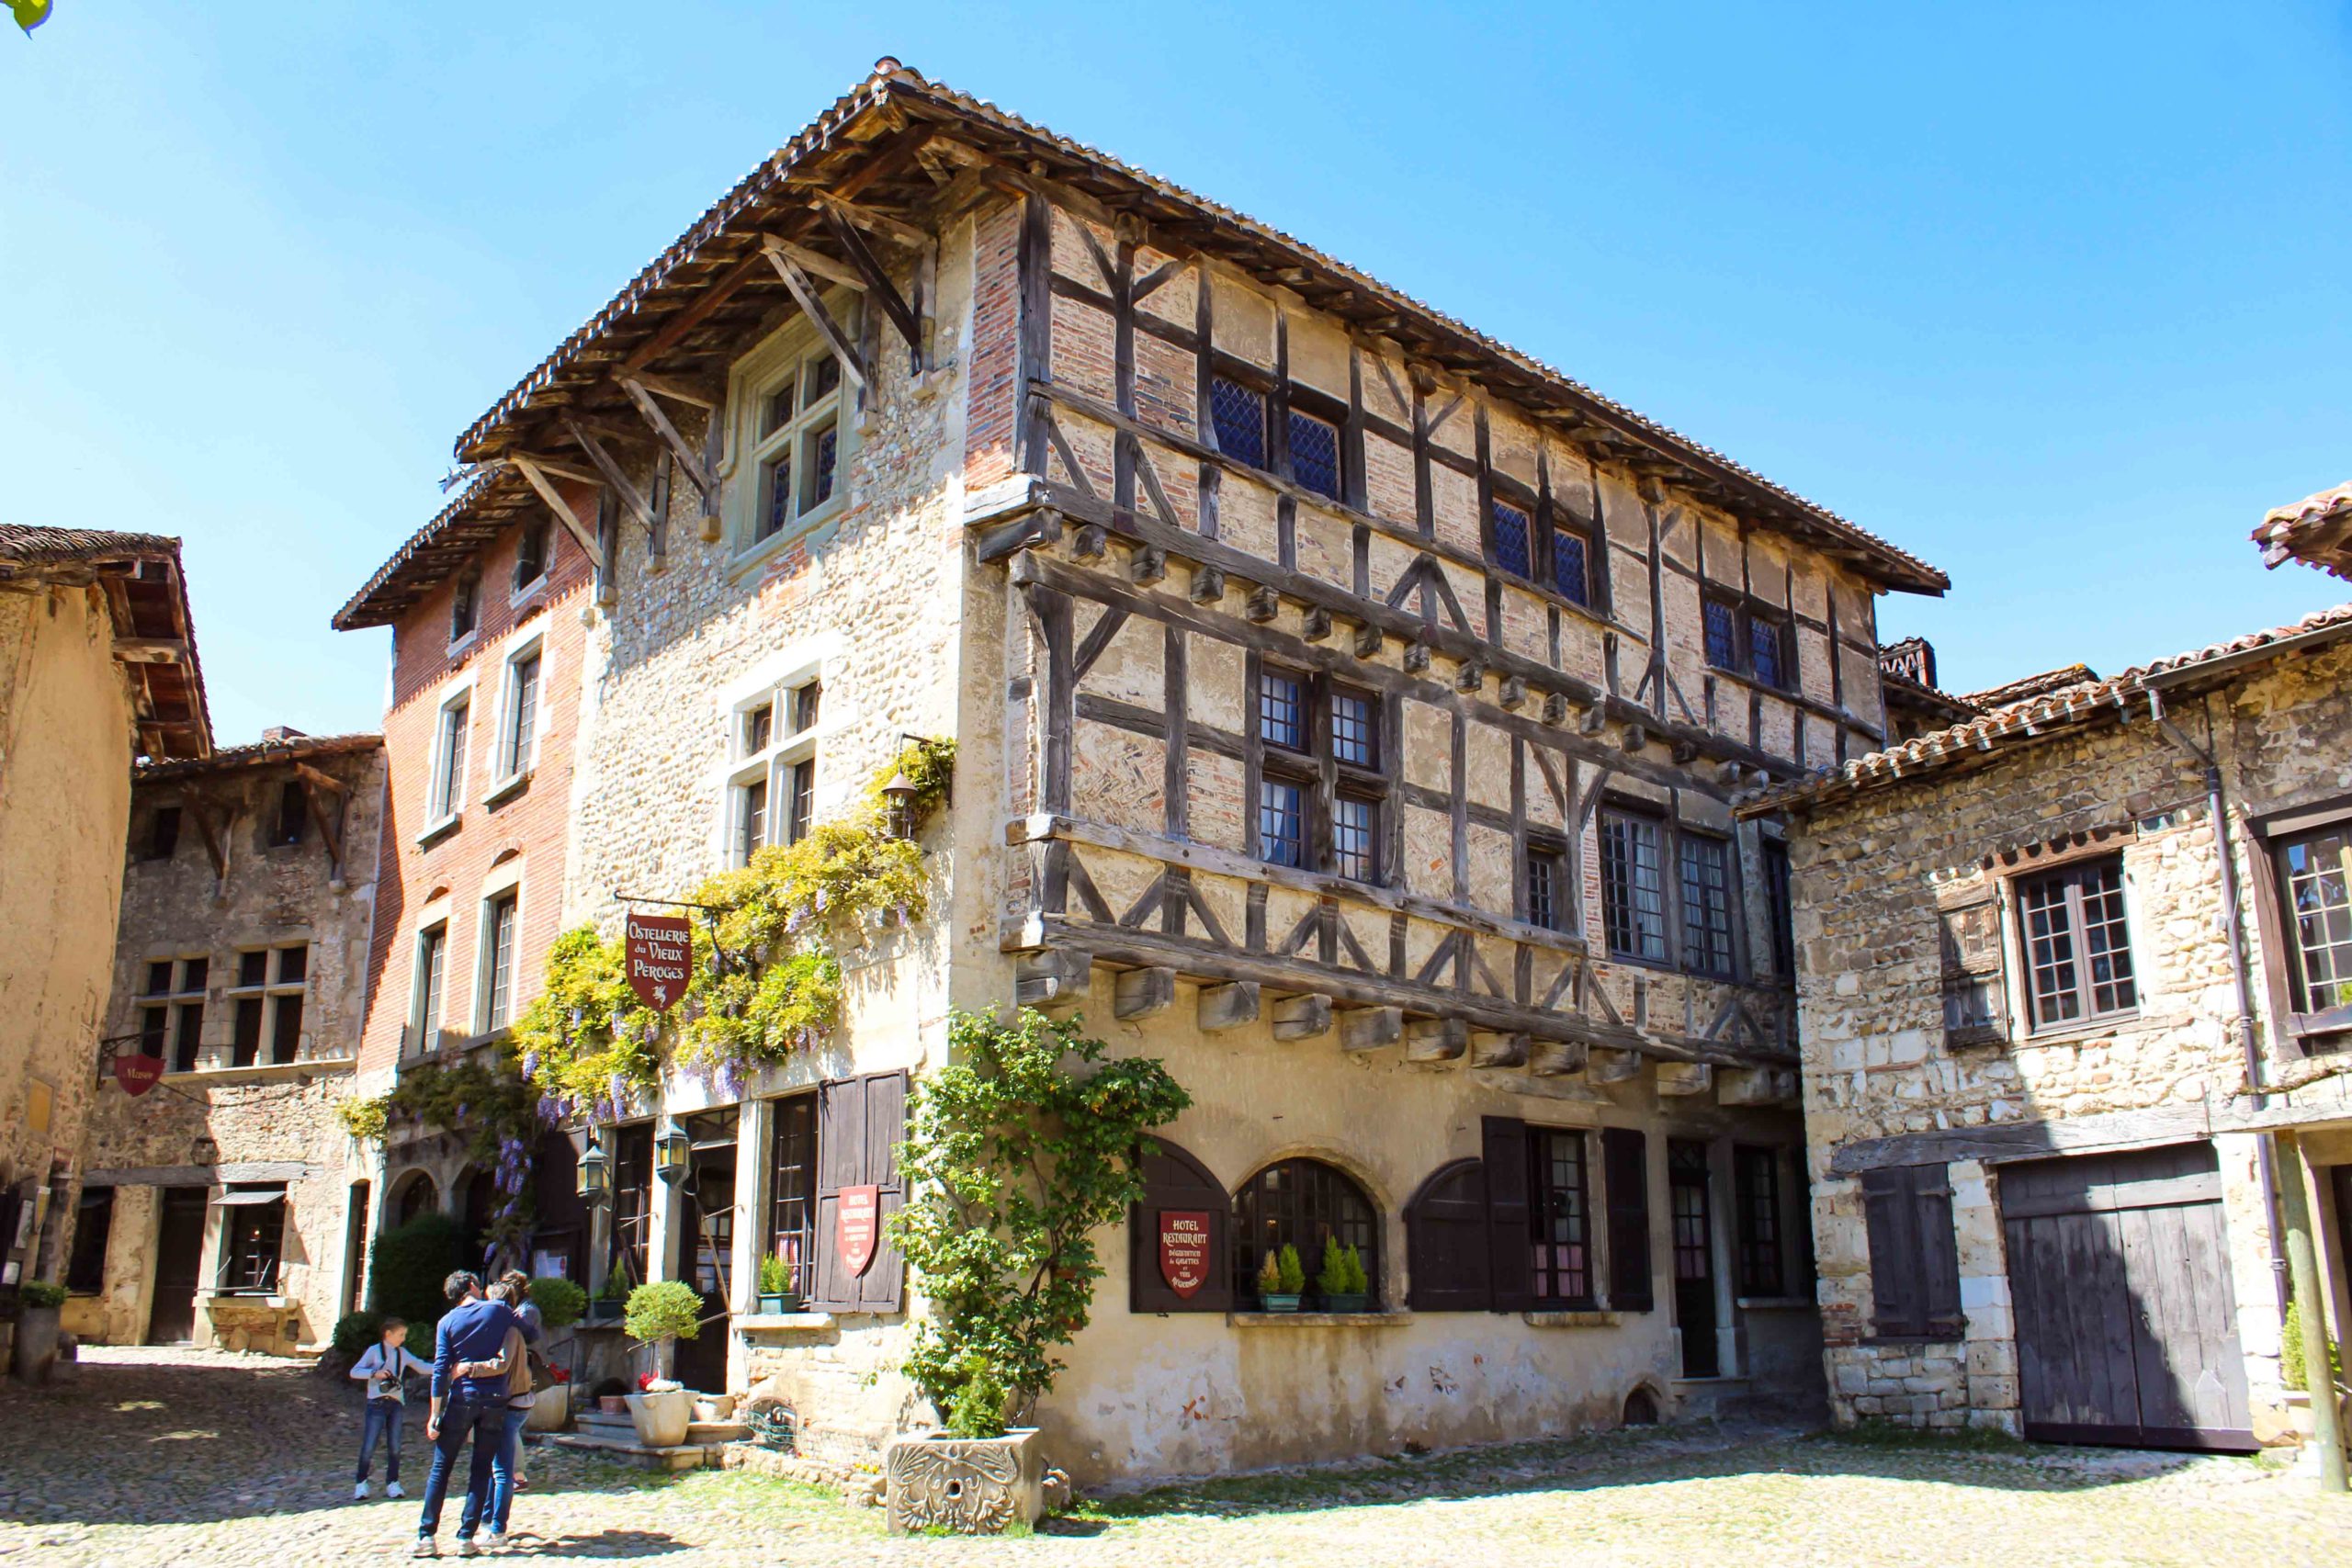 Pérouges © Chabe01 - licence [CC BY-SA 4.0] from Wikimedia Commons